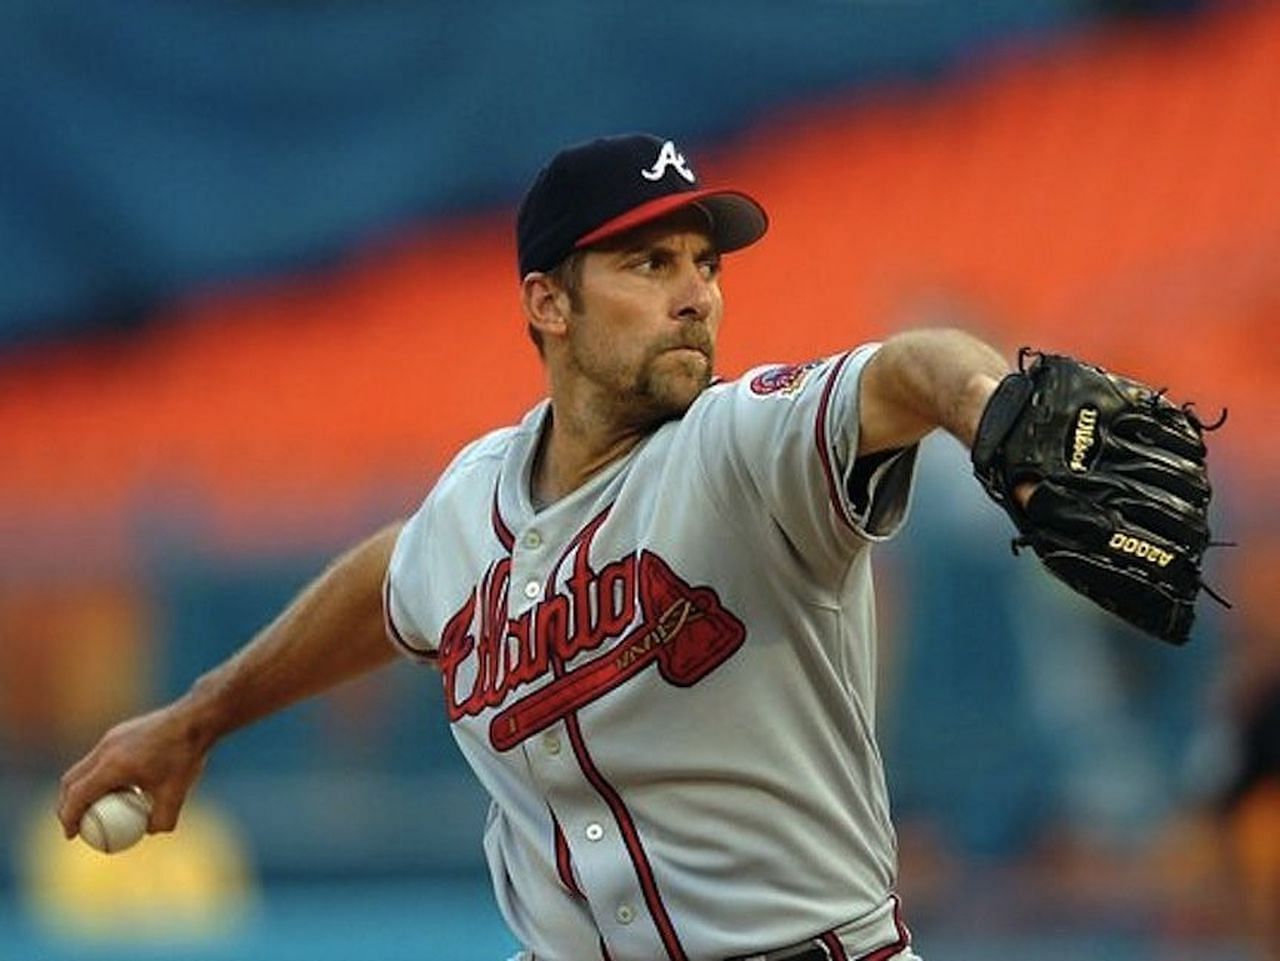 John Smoltz and Al Leiter reportedly barred from MLB Network studio work  after refusing vaccine